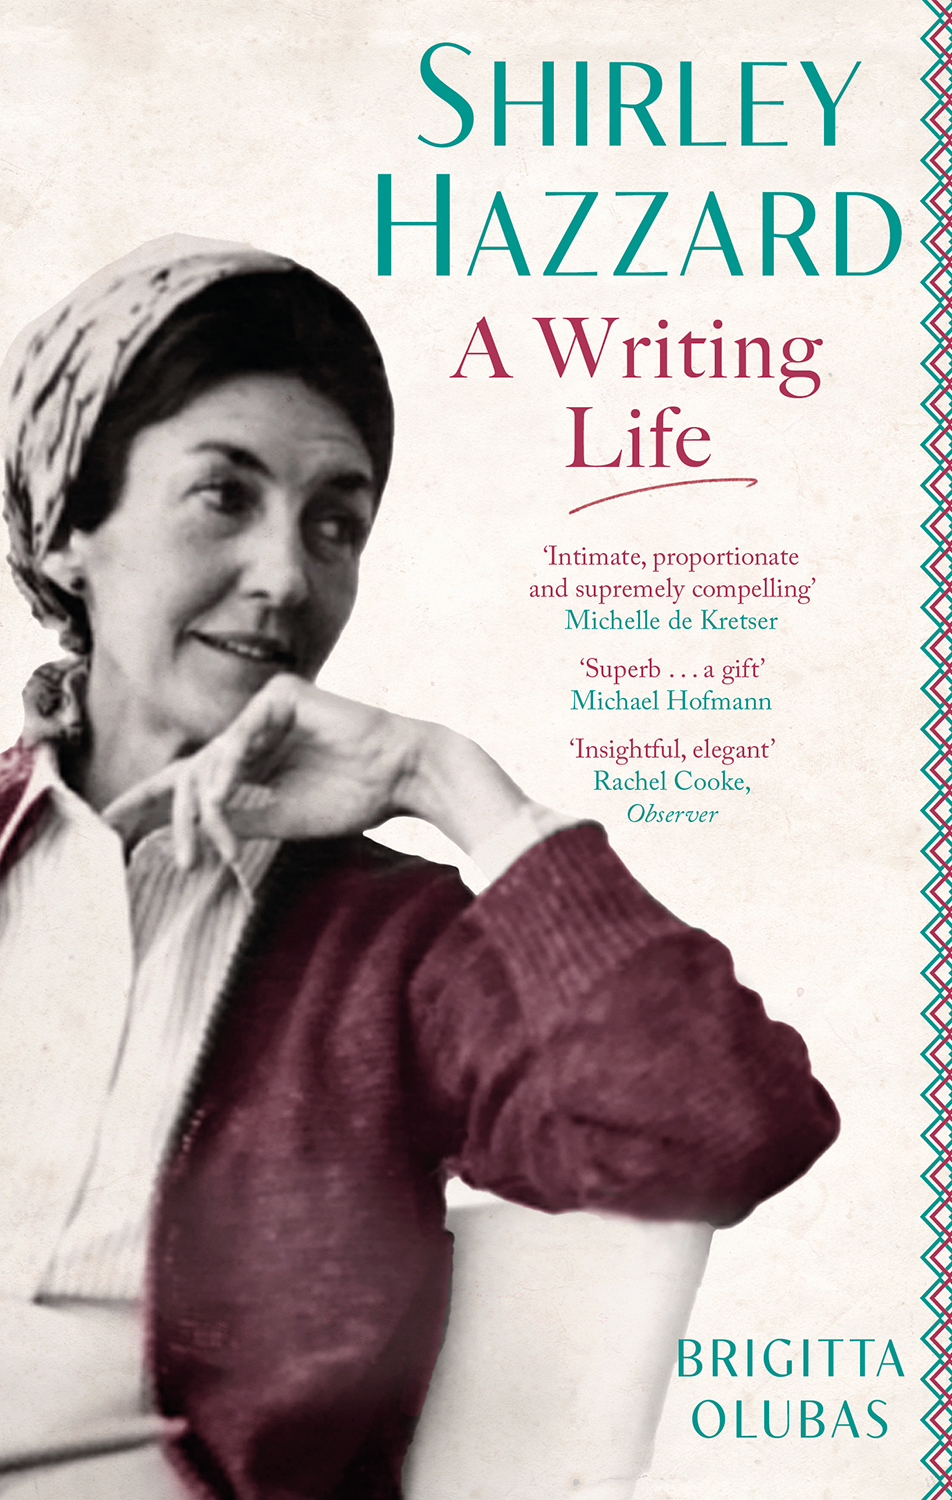 A book cover featuring a woman in a cardigan and head scarf sitting on a chair and leaning on her hand